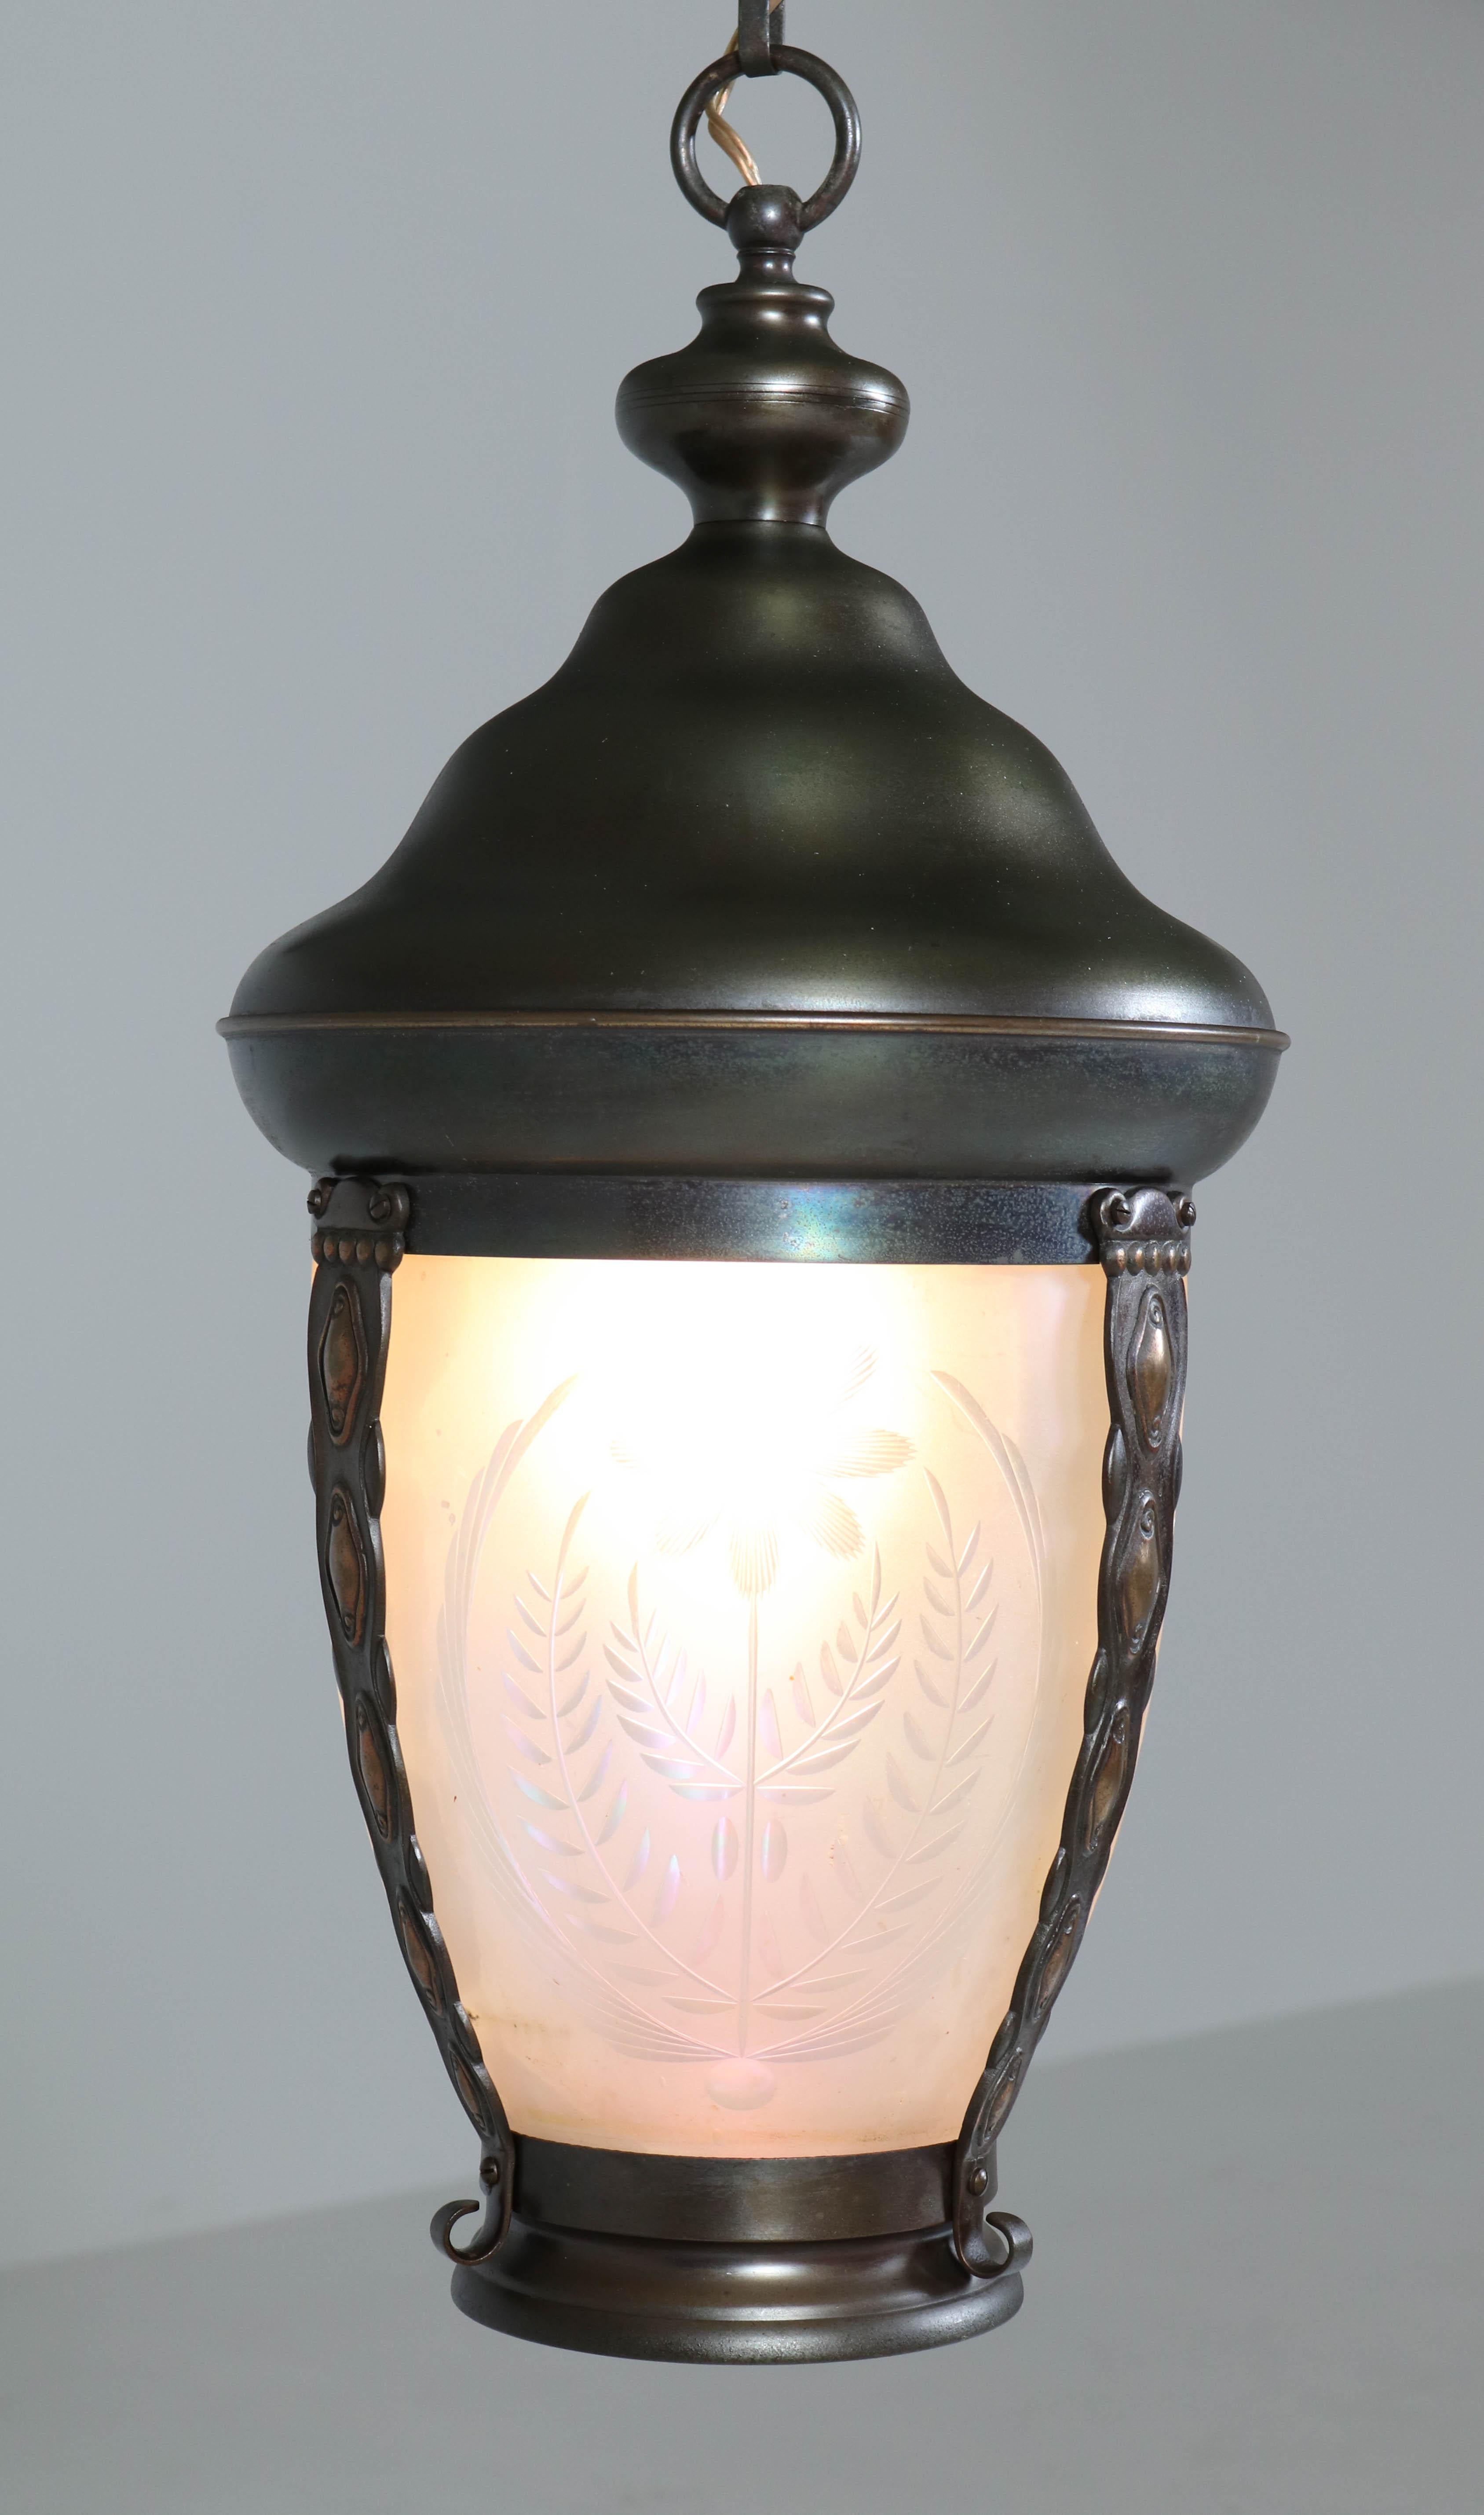 Brass Art Nouveau Lantern or Pendant Lamp with Petrol Glass Shade, 1900s For Sale 6